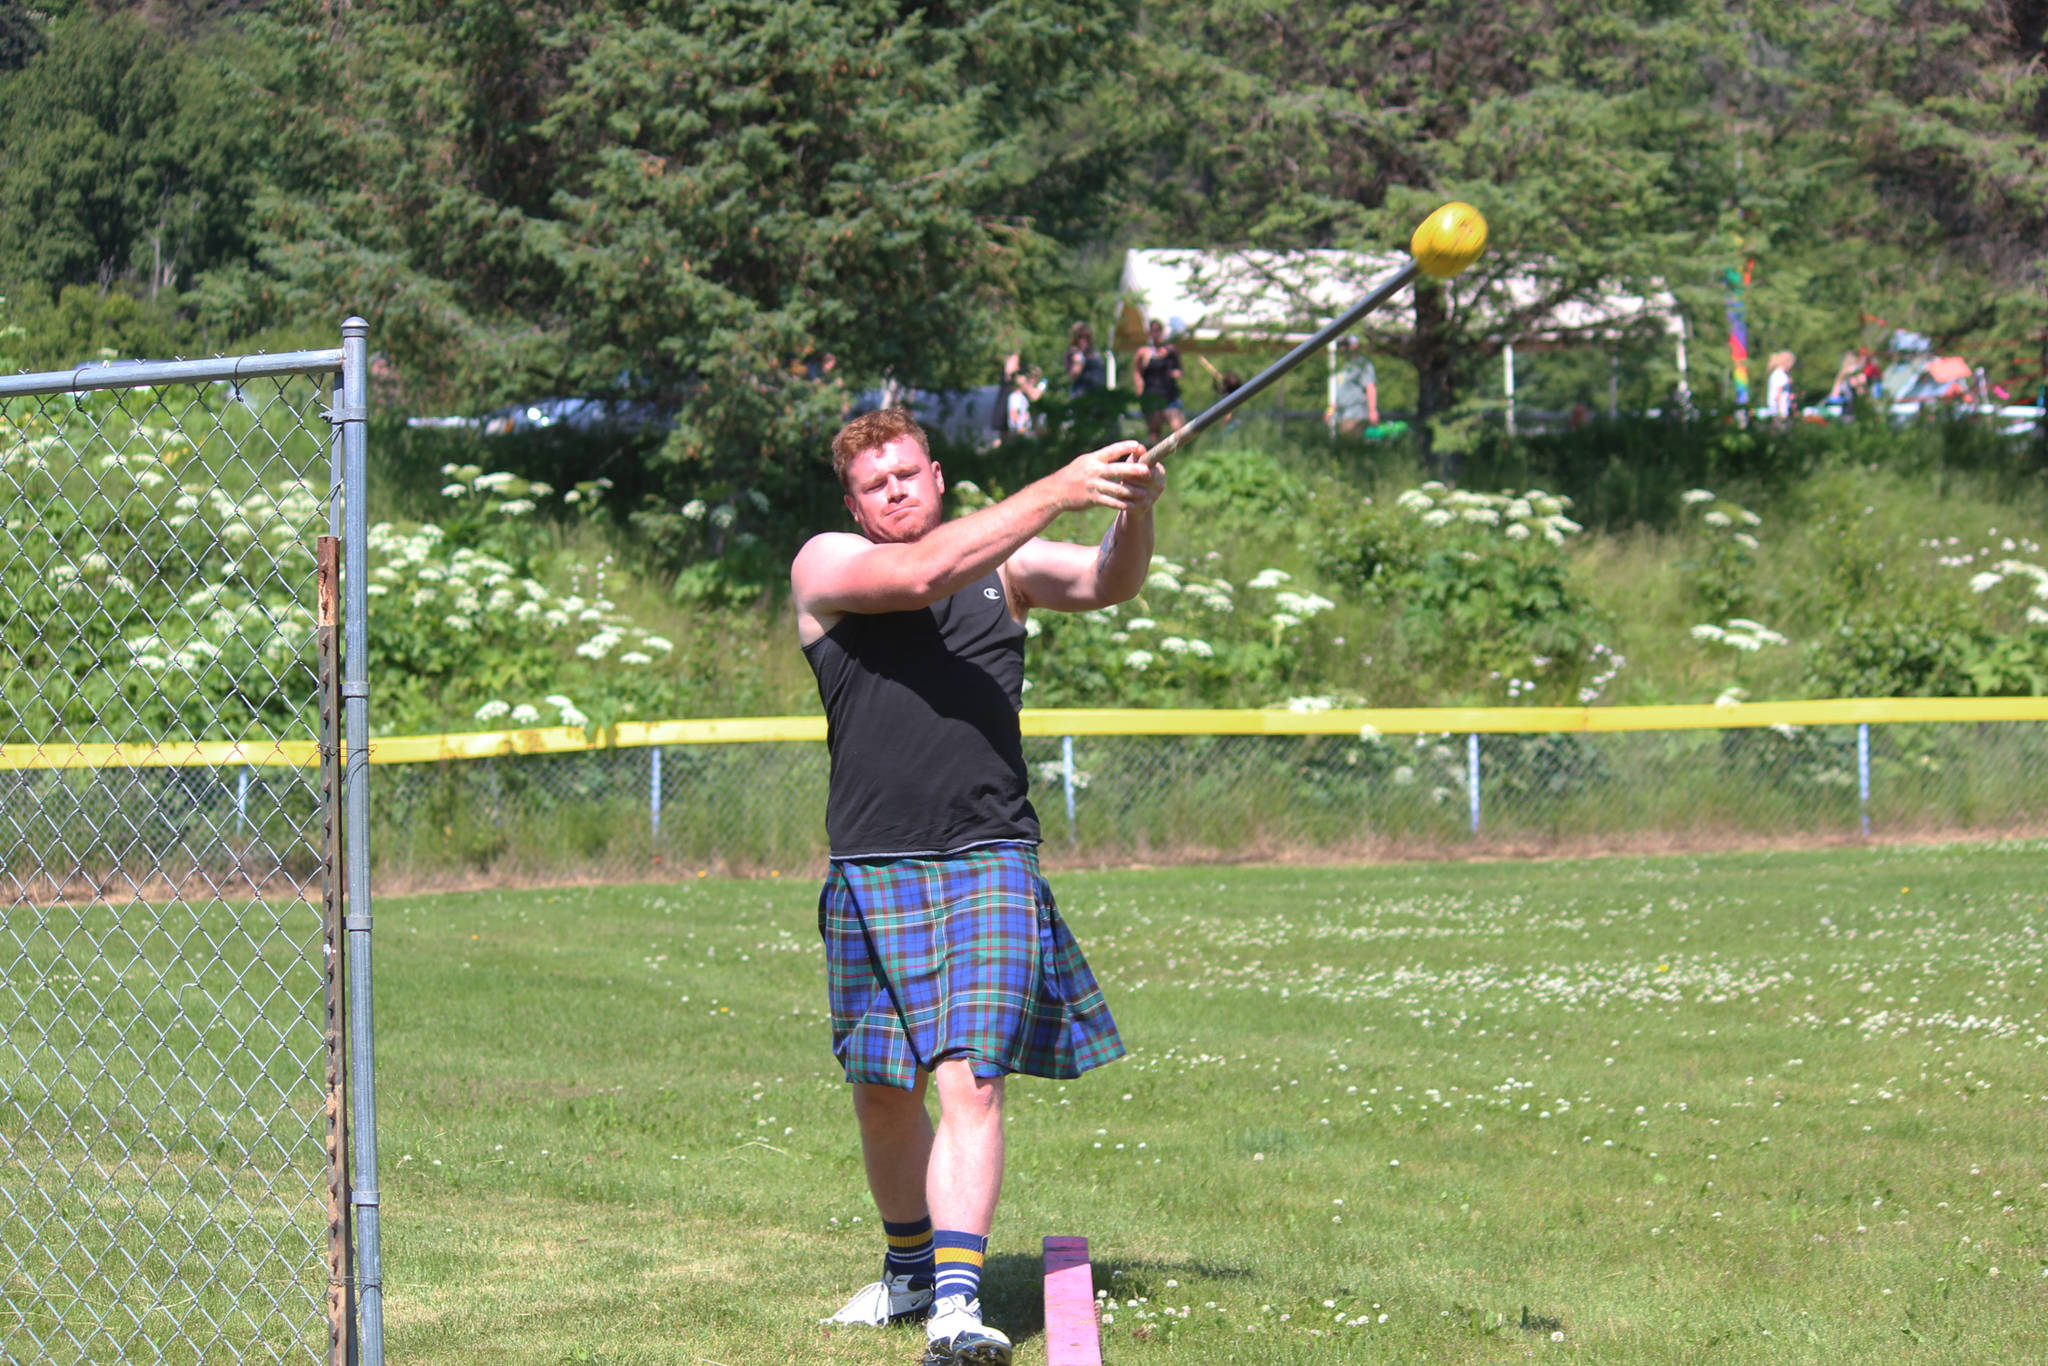 Zachary Fraley of Homer throws a hammer during the hammer throw portion of this year’s Kachemak Bay Scottish Highland Games on Saturday, July 7, 2018 at Karen Hornaday Park in Homer, Alaska. (Photo by Megan Pacer/Homer News)